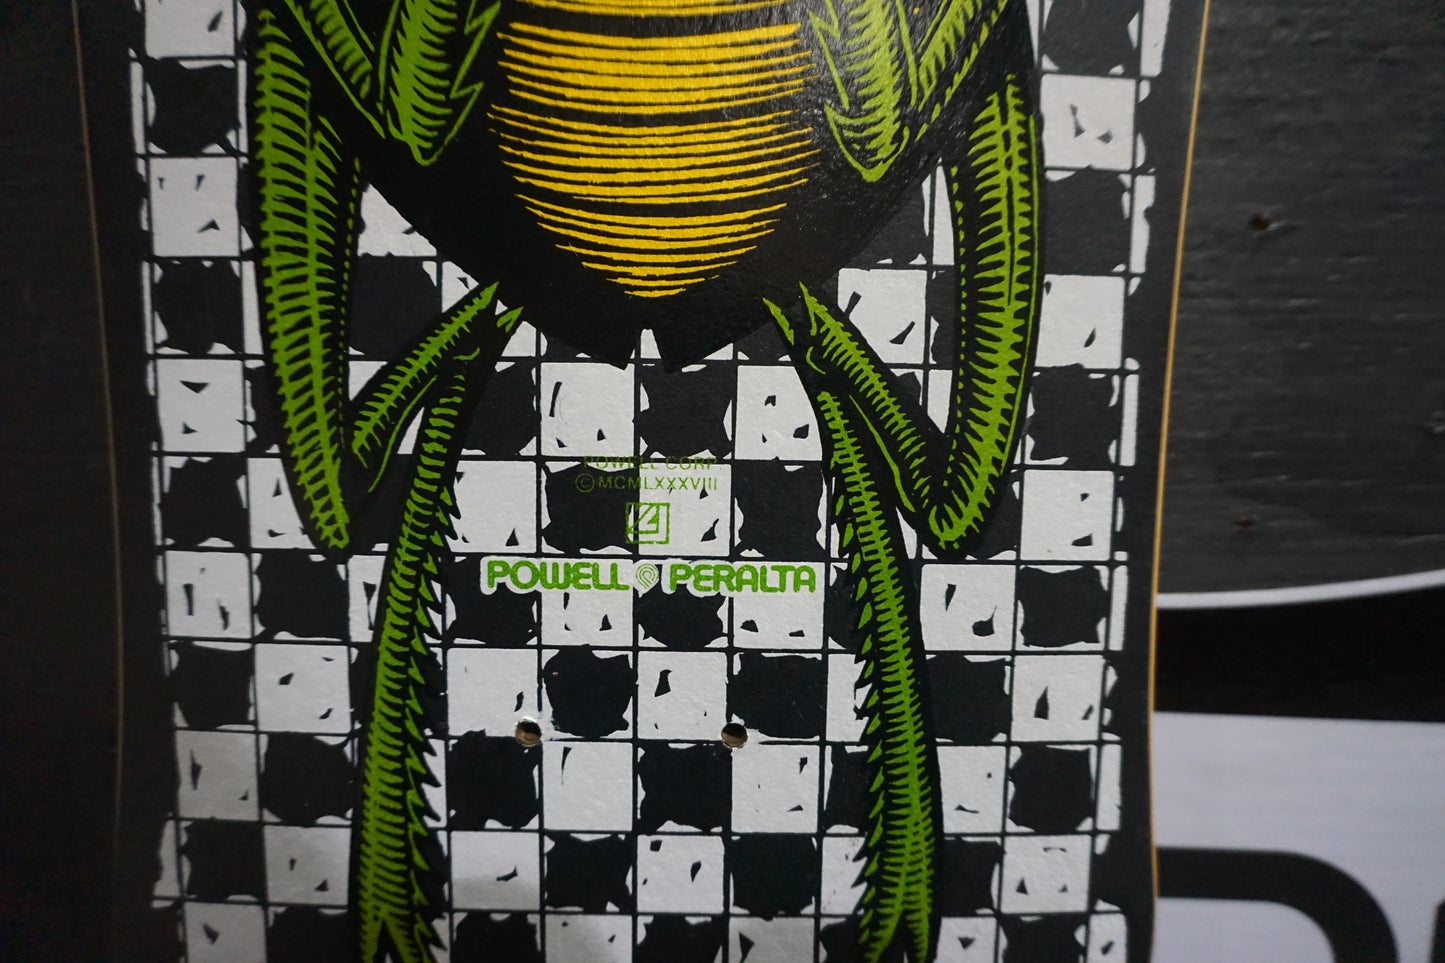 Powell Peralta Team Bug - Like New- Green - AS IS - No Returns.